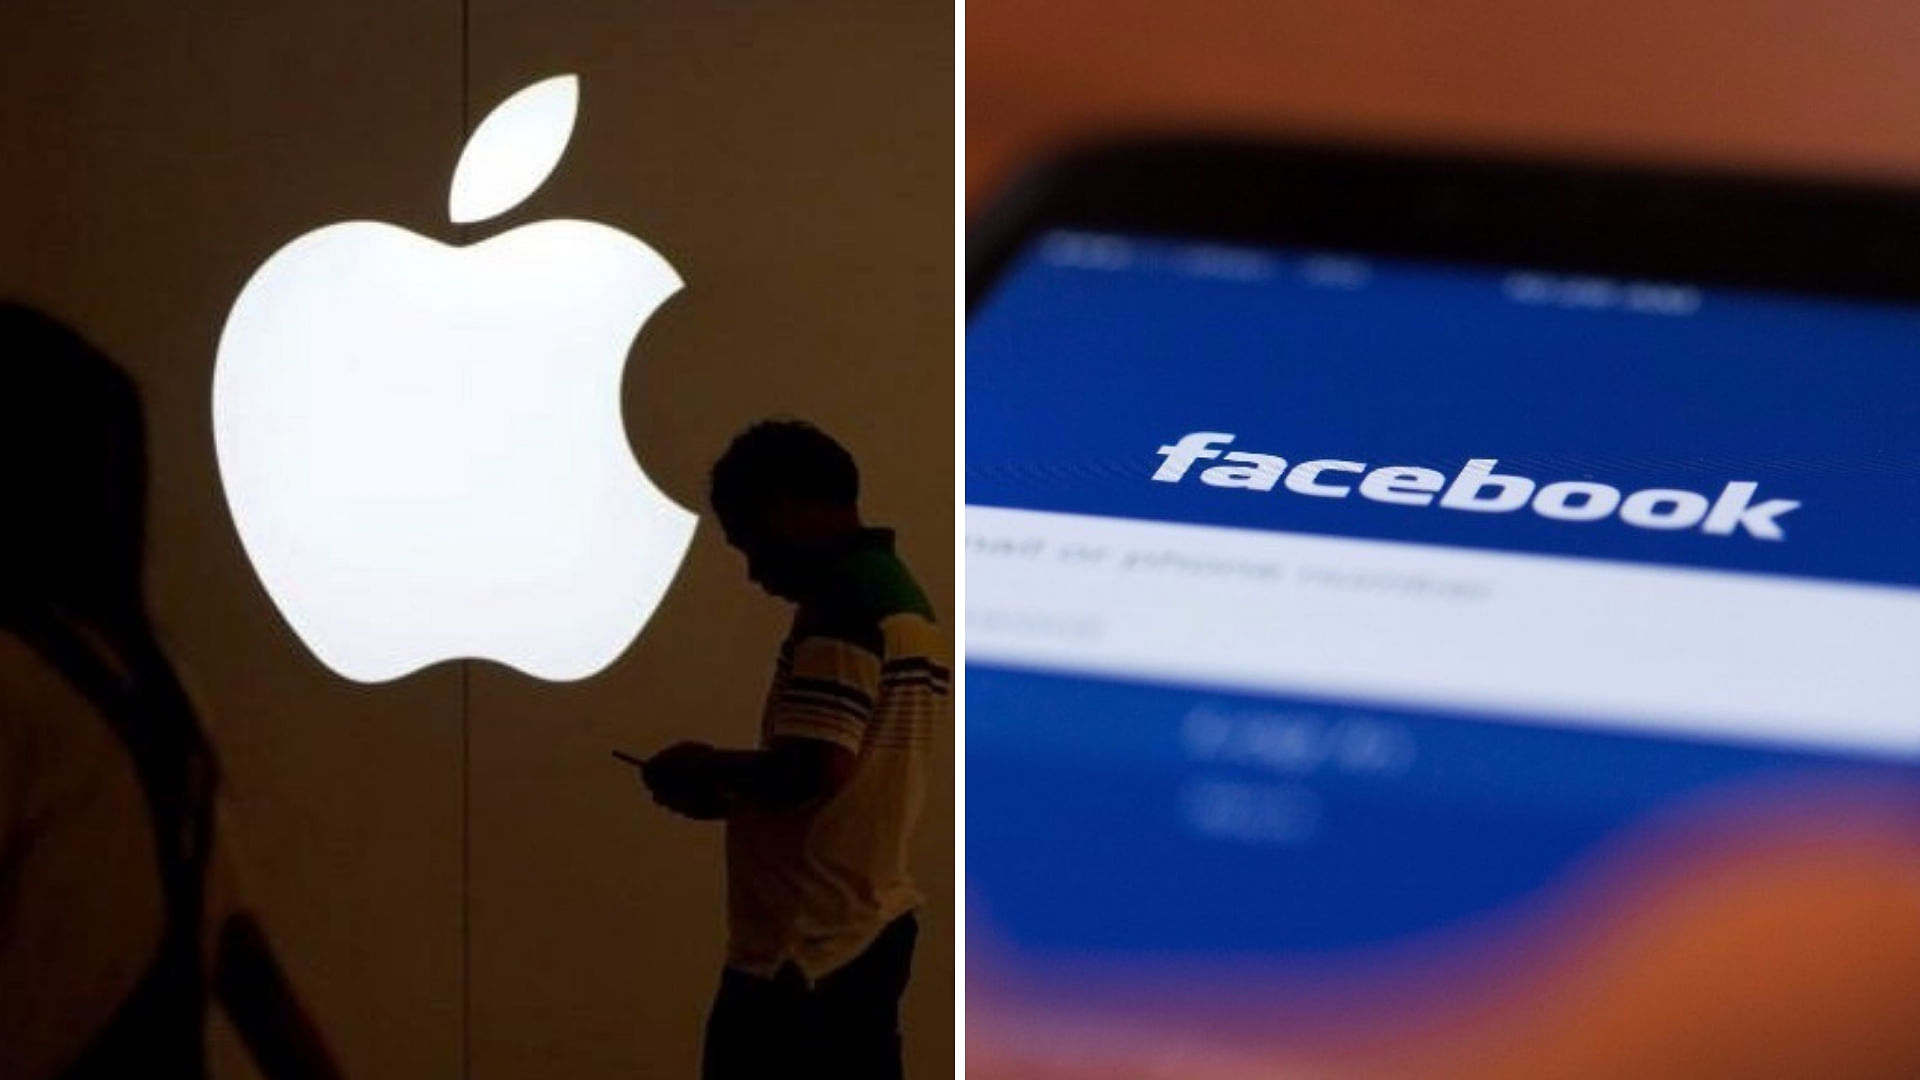 Apple shut down Facebook’s efforts to sidestep Apple’s app store and its tighter rules on privacy, along with restricting Facebook’s ability to test core apps such as Facebook and Instagram before they are released through the app store.